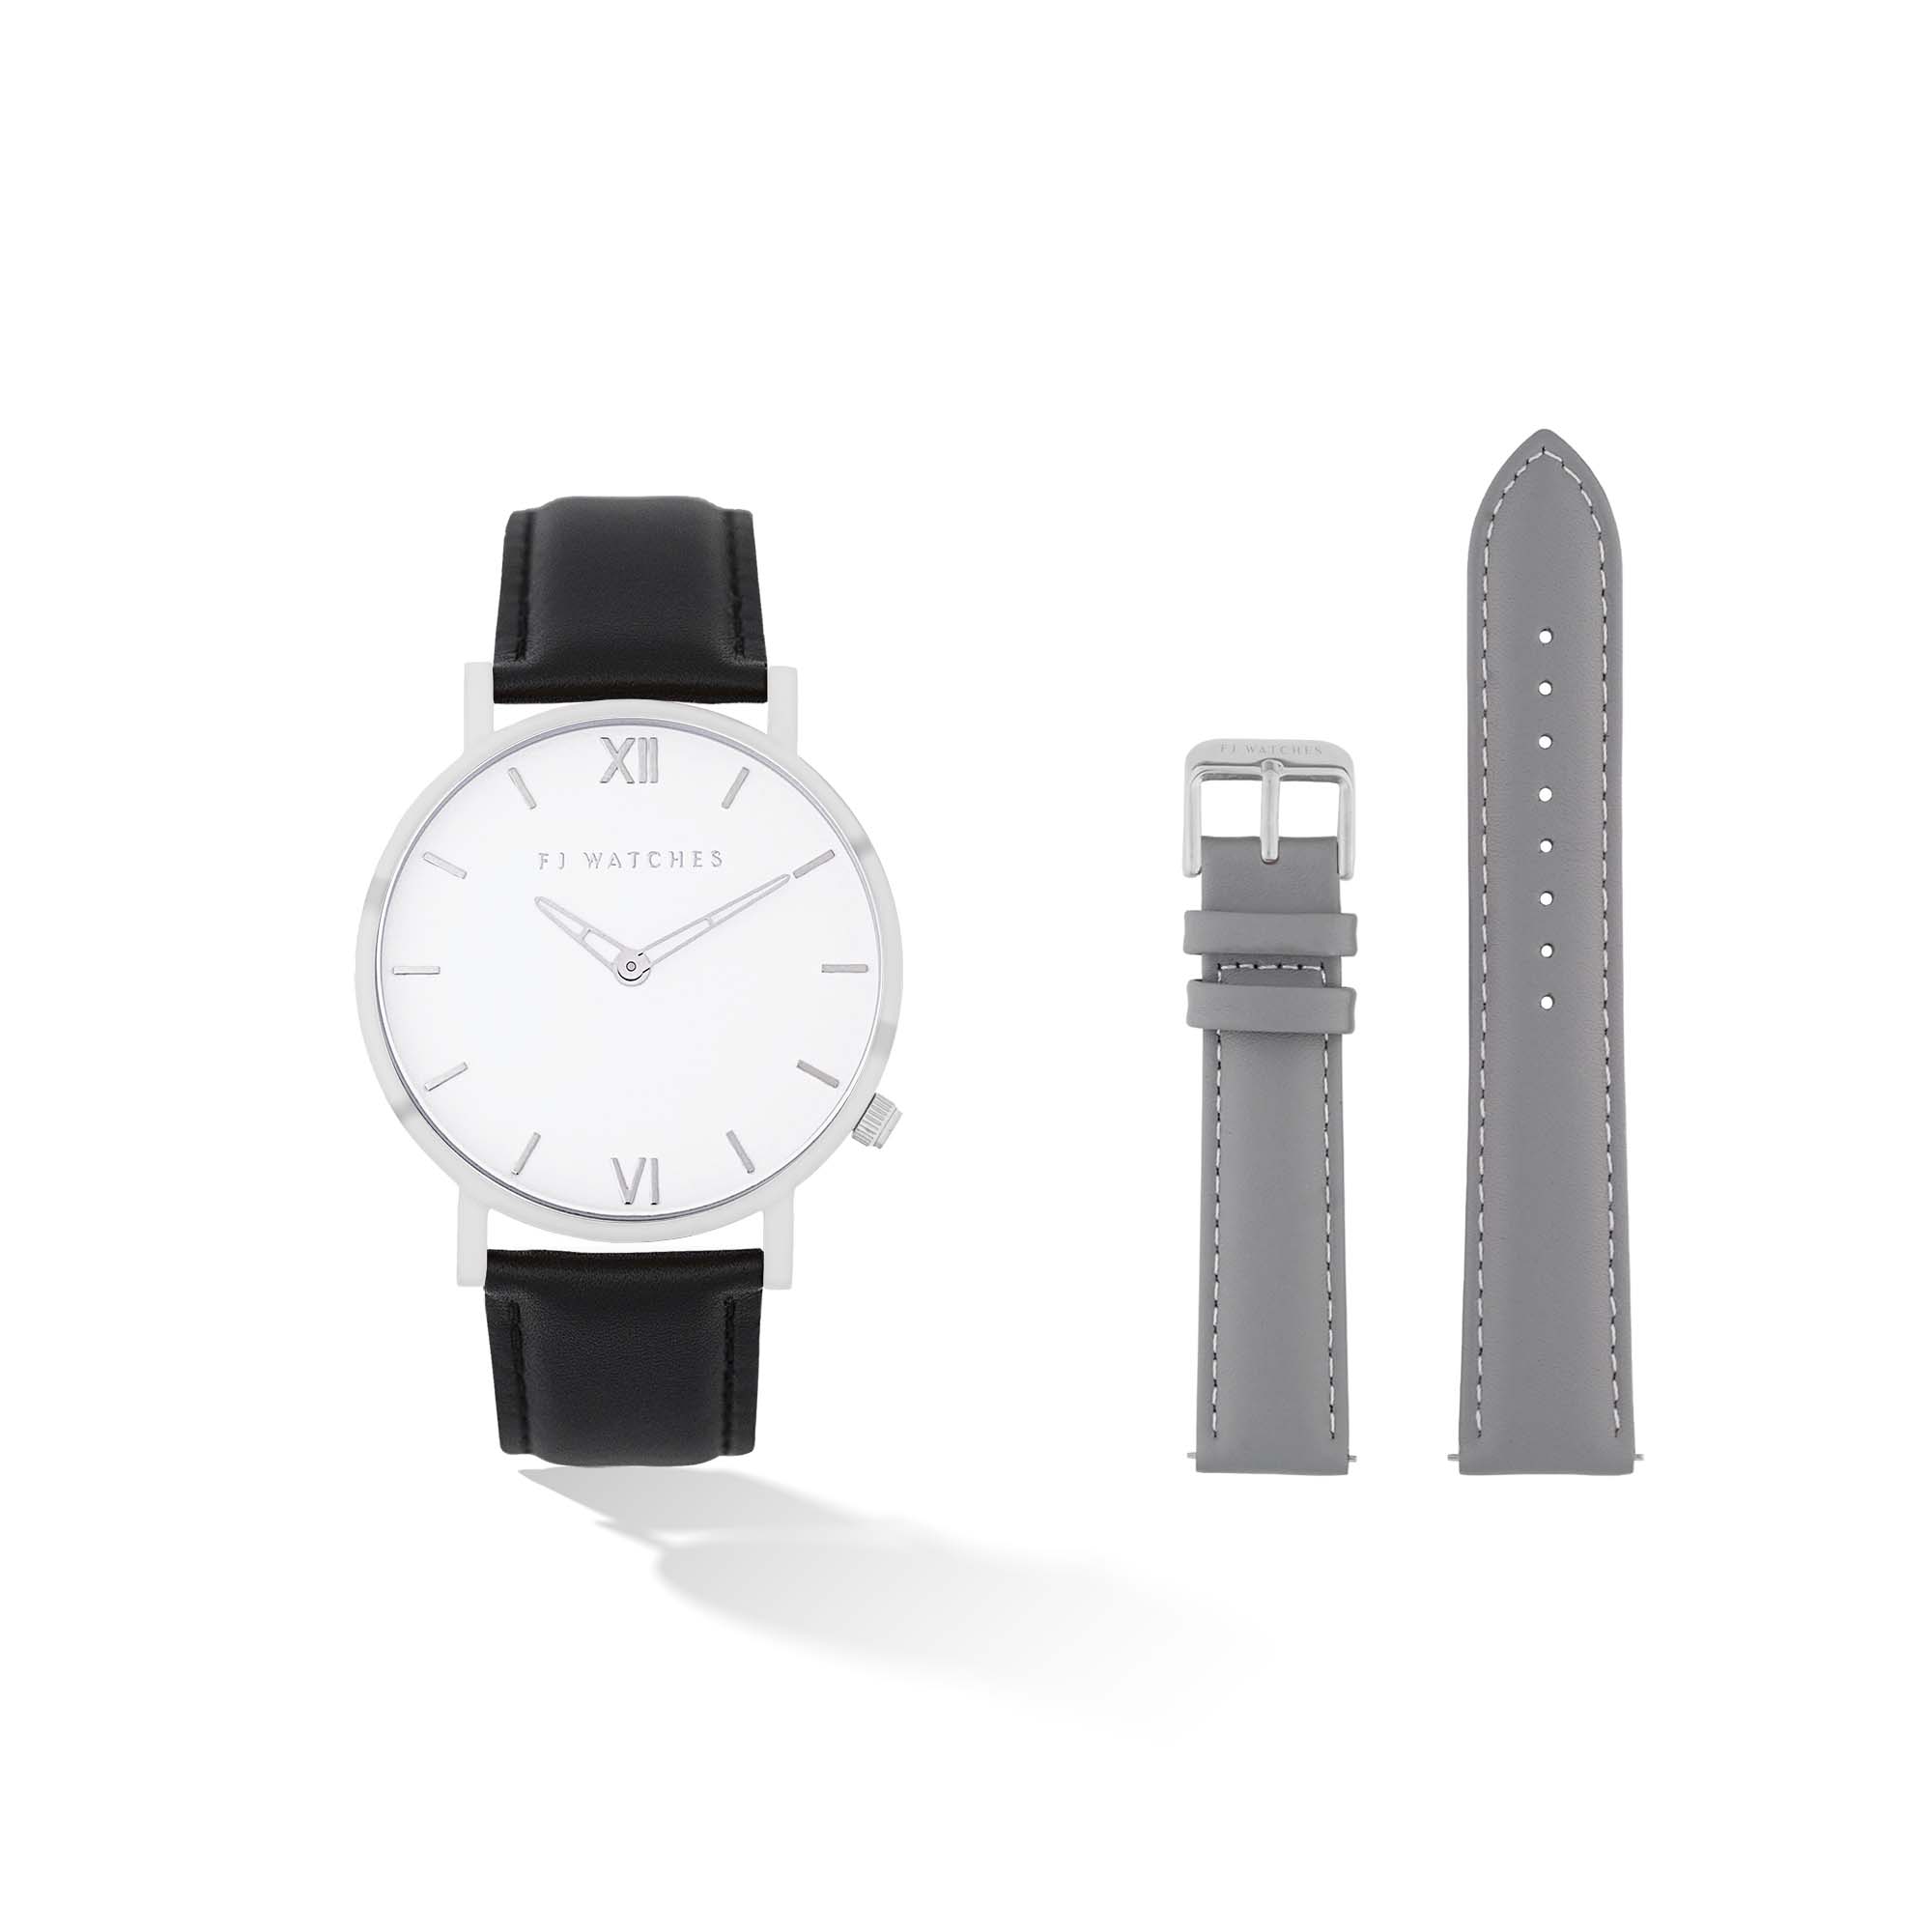 Discover the Silver sun set, a 42mm men's watch from Five Jwlry. Equipped with a minimalist white and silver dial. In this special edition, this watch comes with two leathers, one black leather and one gray. The perfect gift!